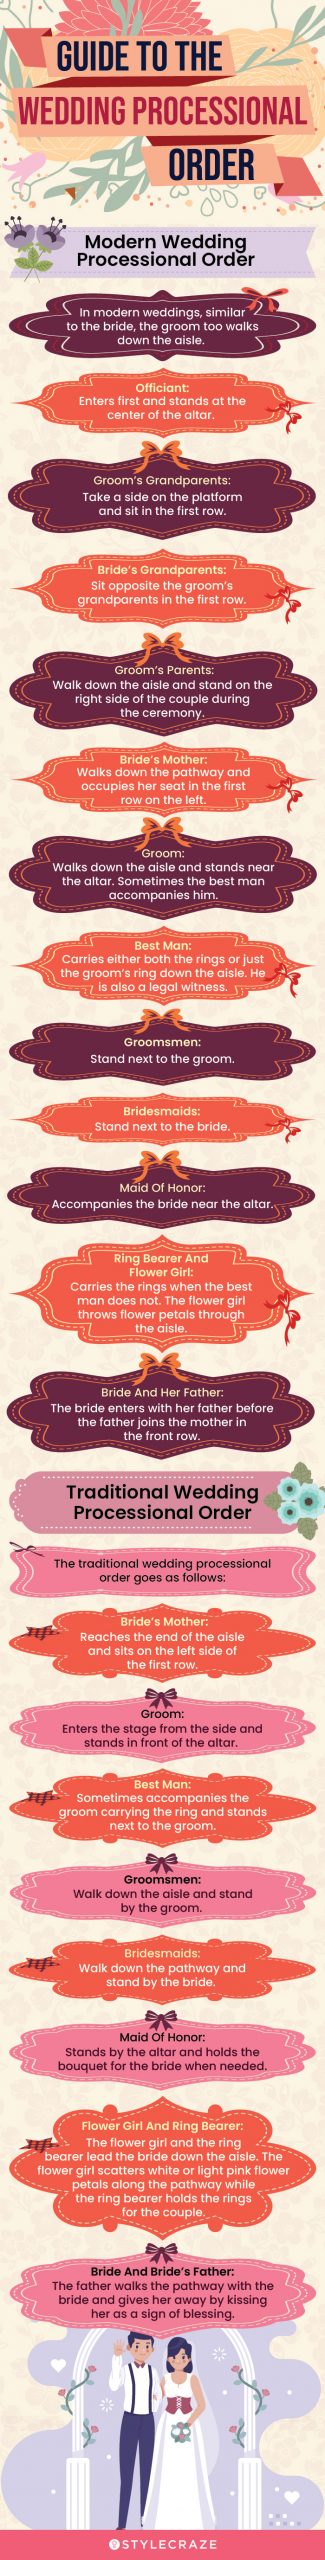 guide to the wedding processional order (infographic)